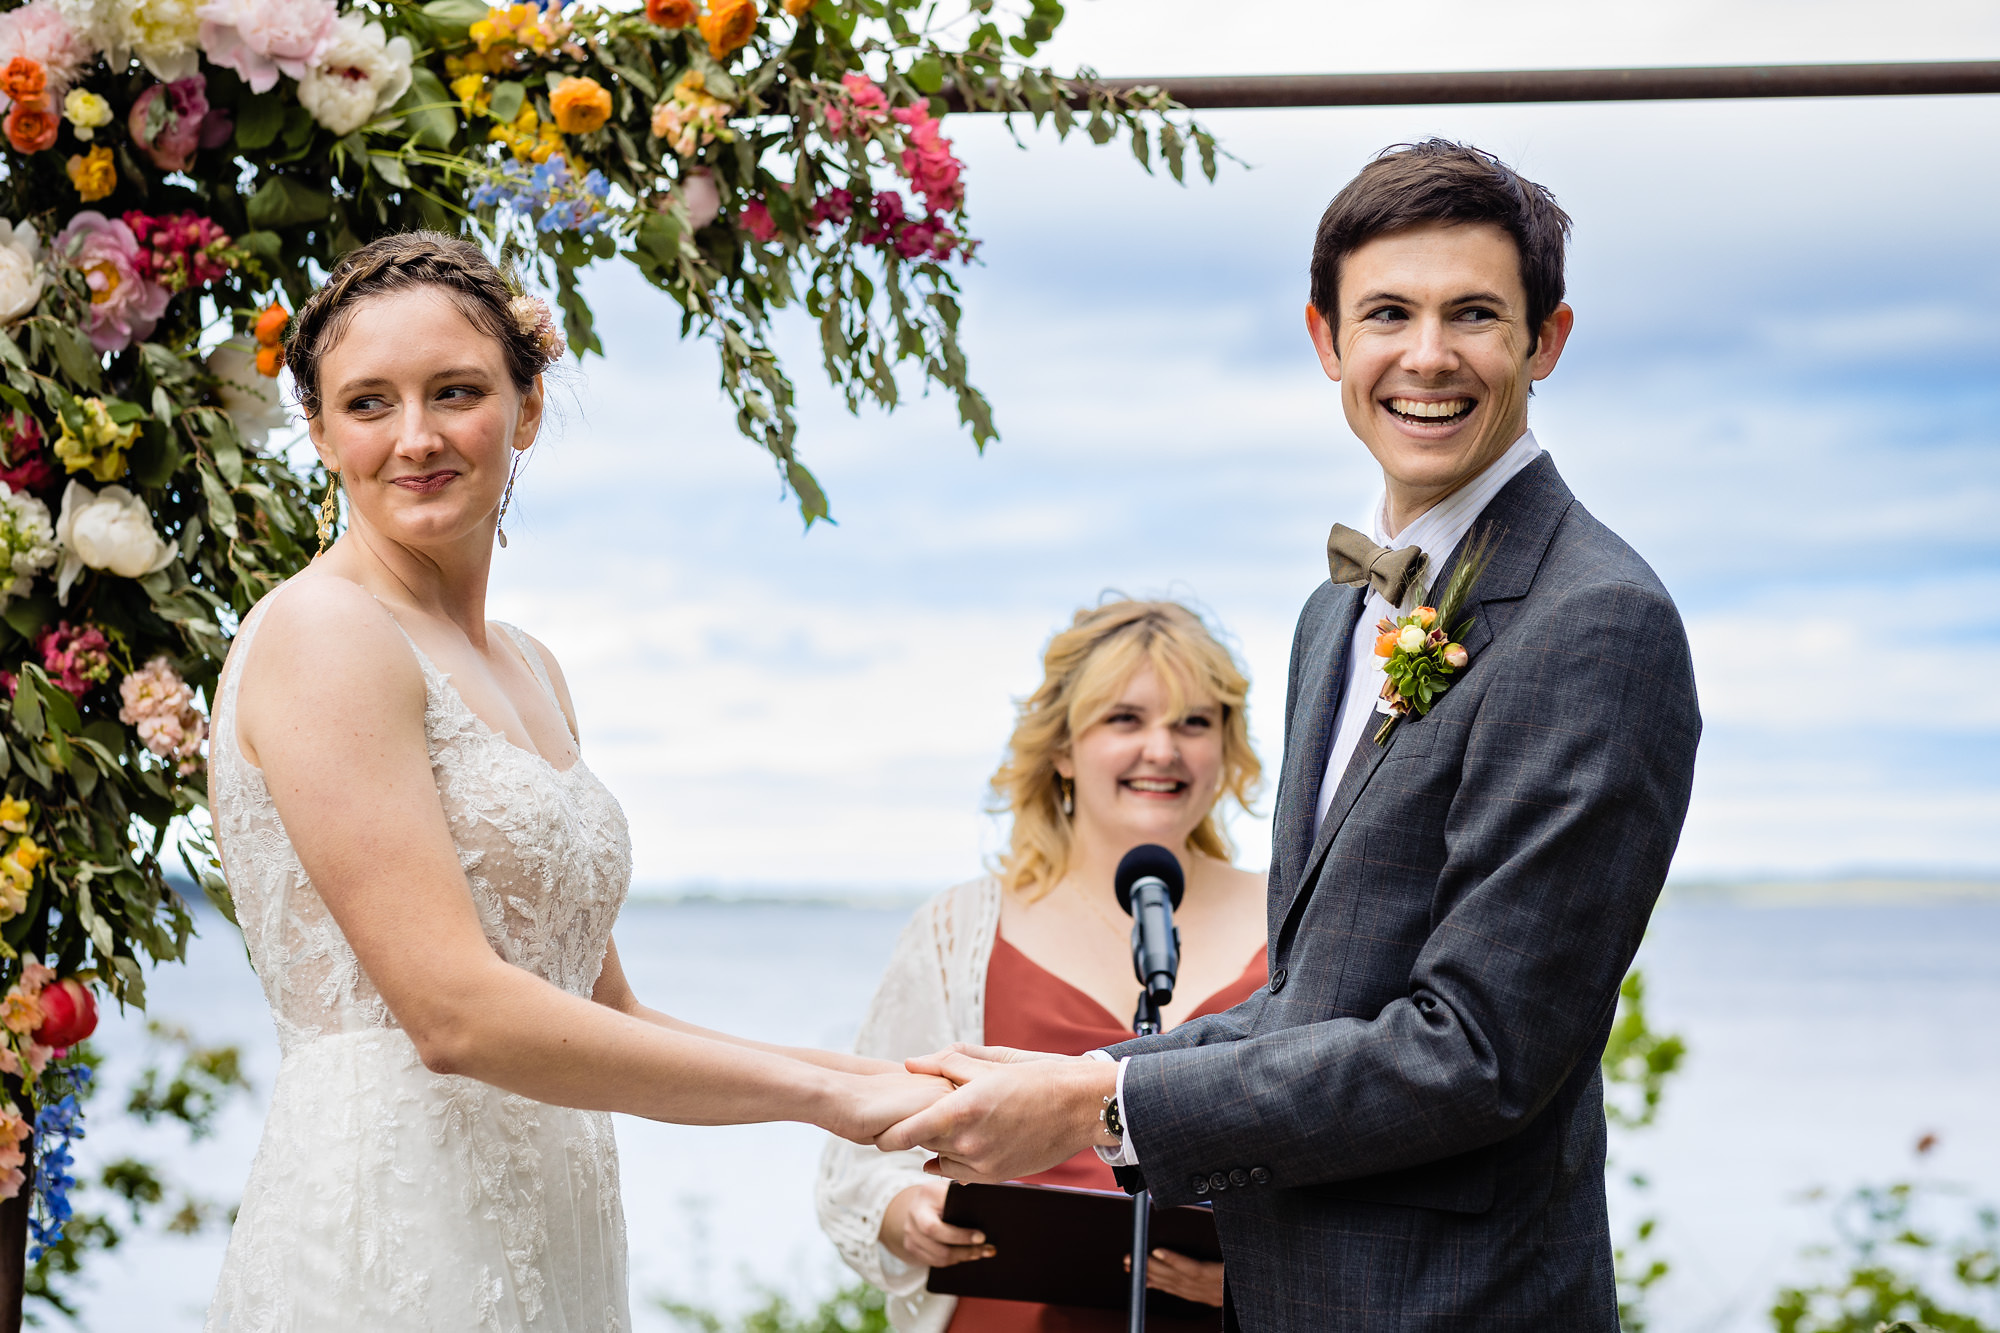 A Chebeague Island wedding ceremony at a family residence